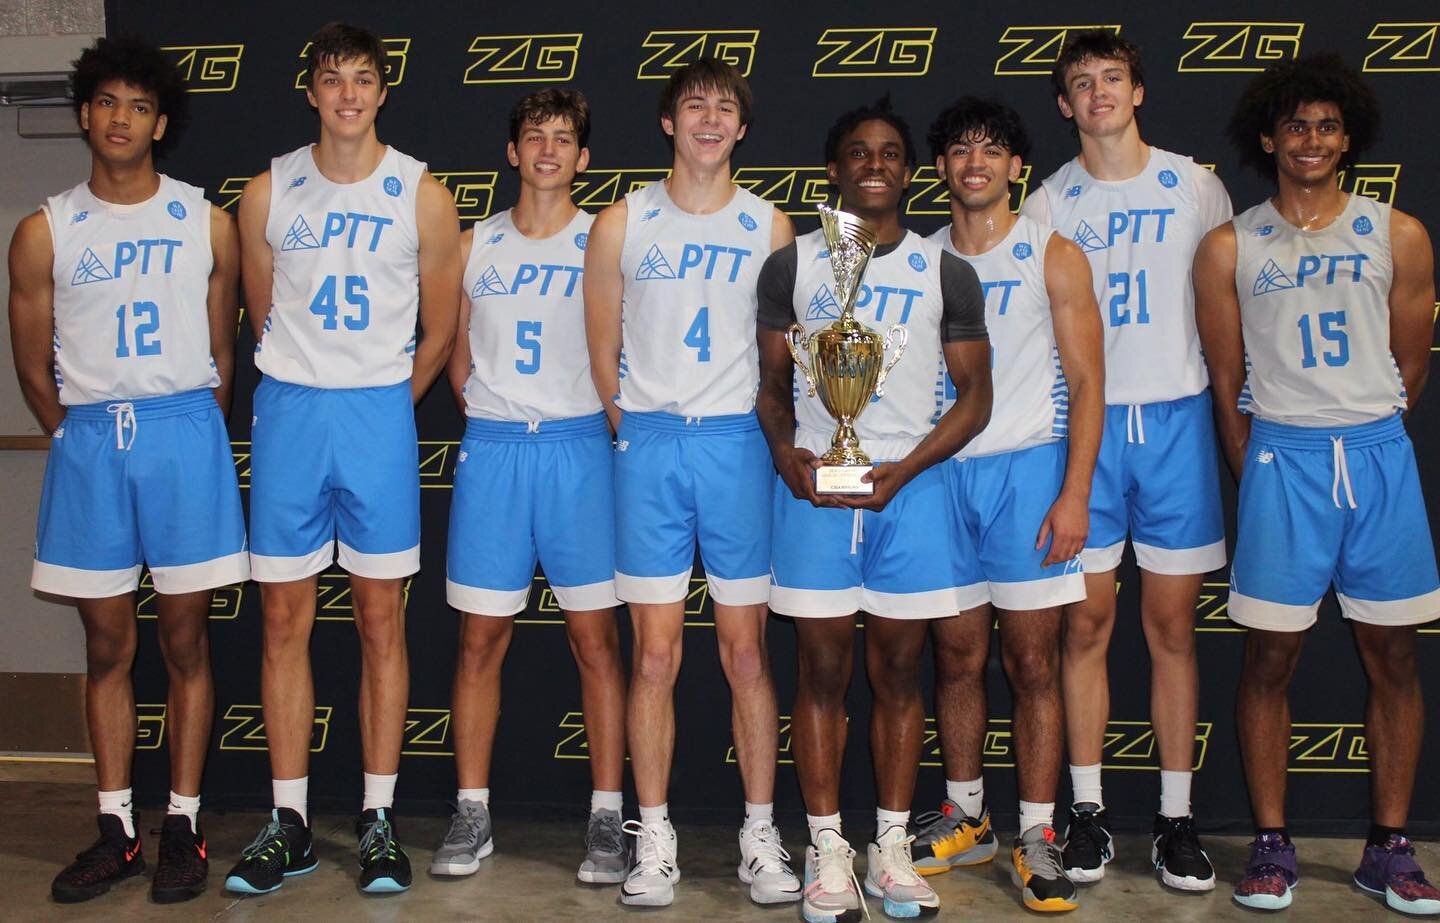 𝙏𝙝𝙖𝙩 🏆 𝙁𝙚𝙚𝙡𝙞𝙣𝙜

#ObsessProcess #PTThoops